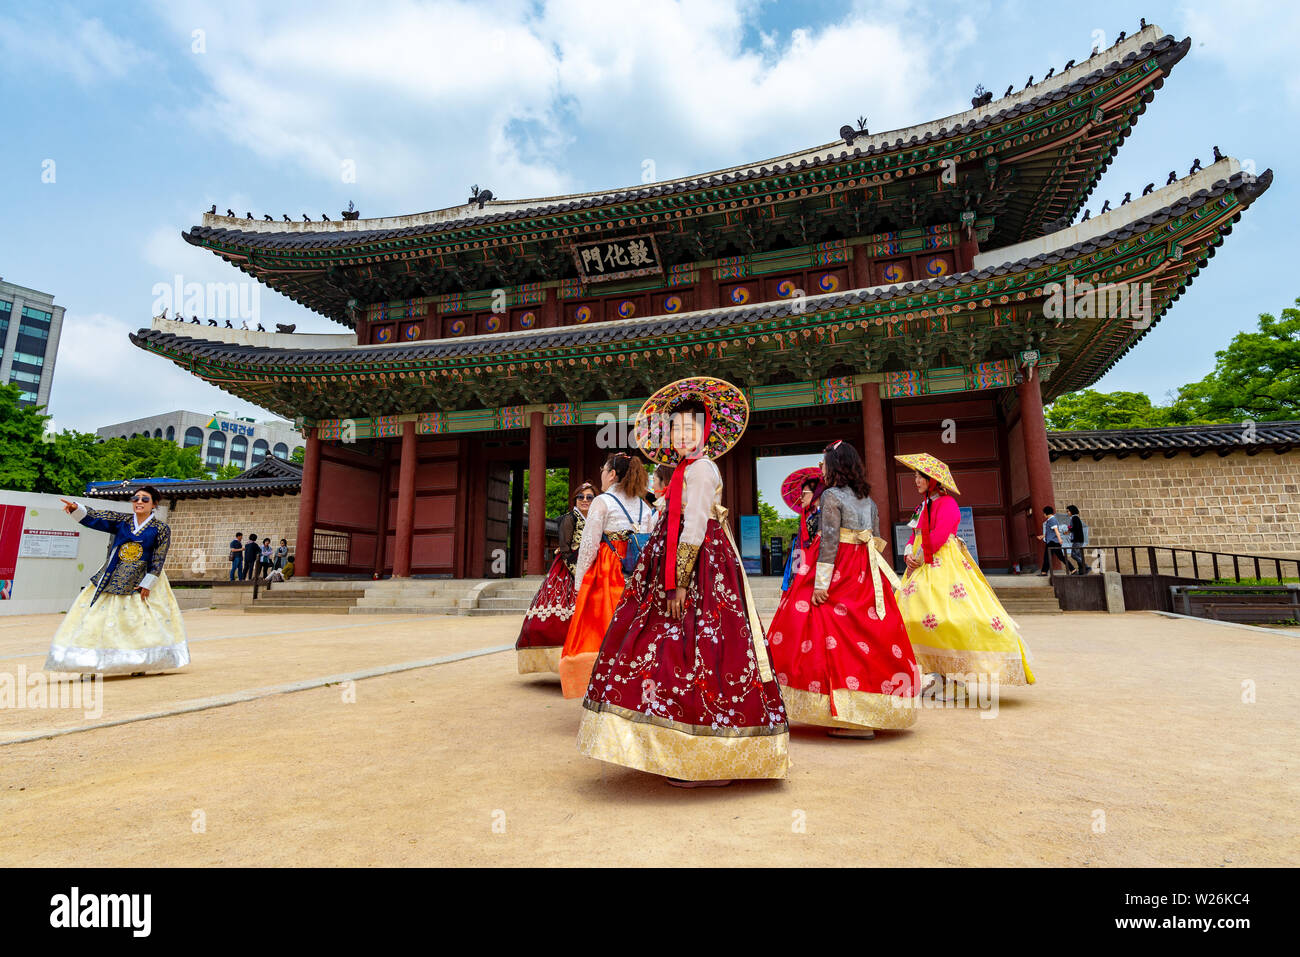 SEOUL, SOUTH KOREA - JUNE 1, 2019: A group of women in traditional korean costume are about to enter the Changdeokgung Palace through the main gate Stock Photo